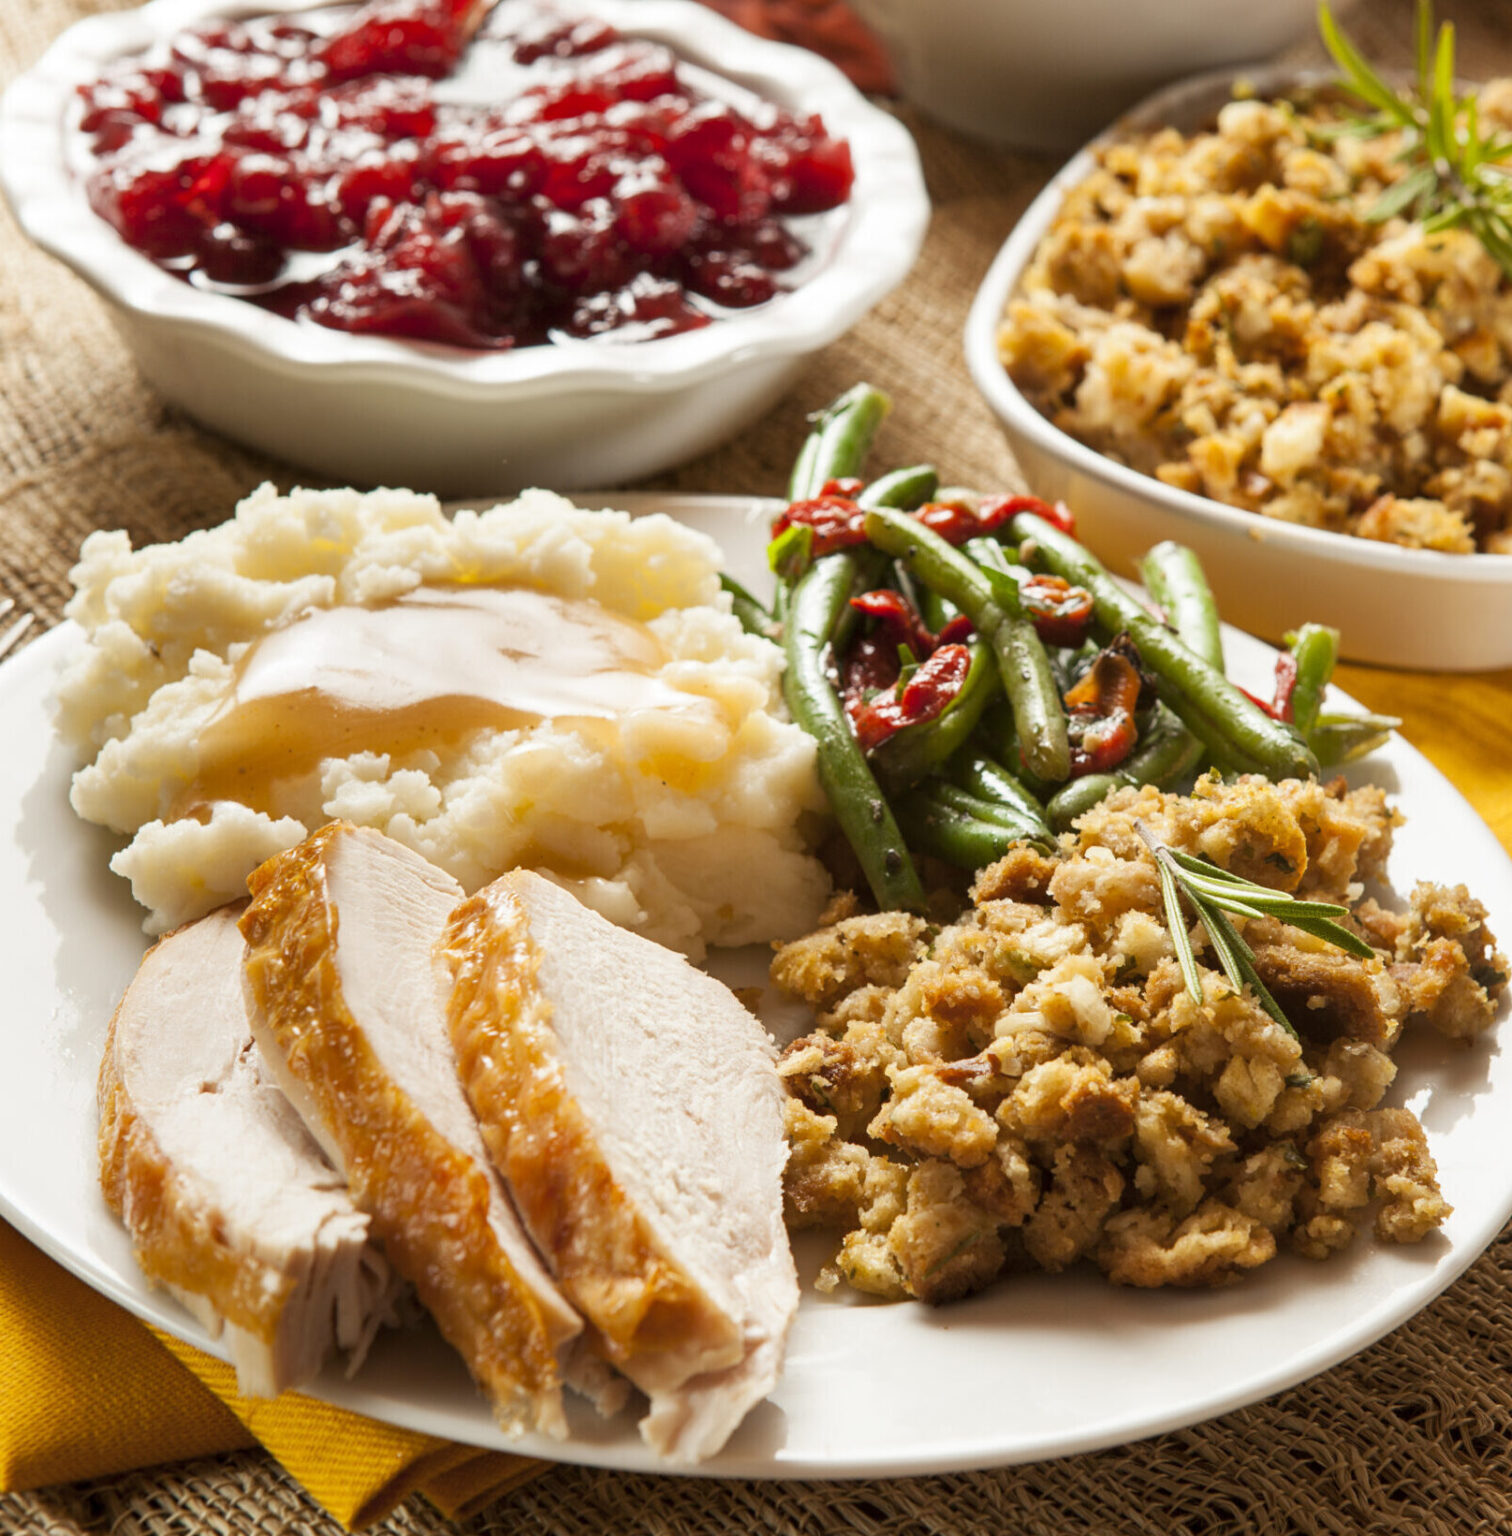 Preorder your Thanksgiving meal Astoria Co+op